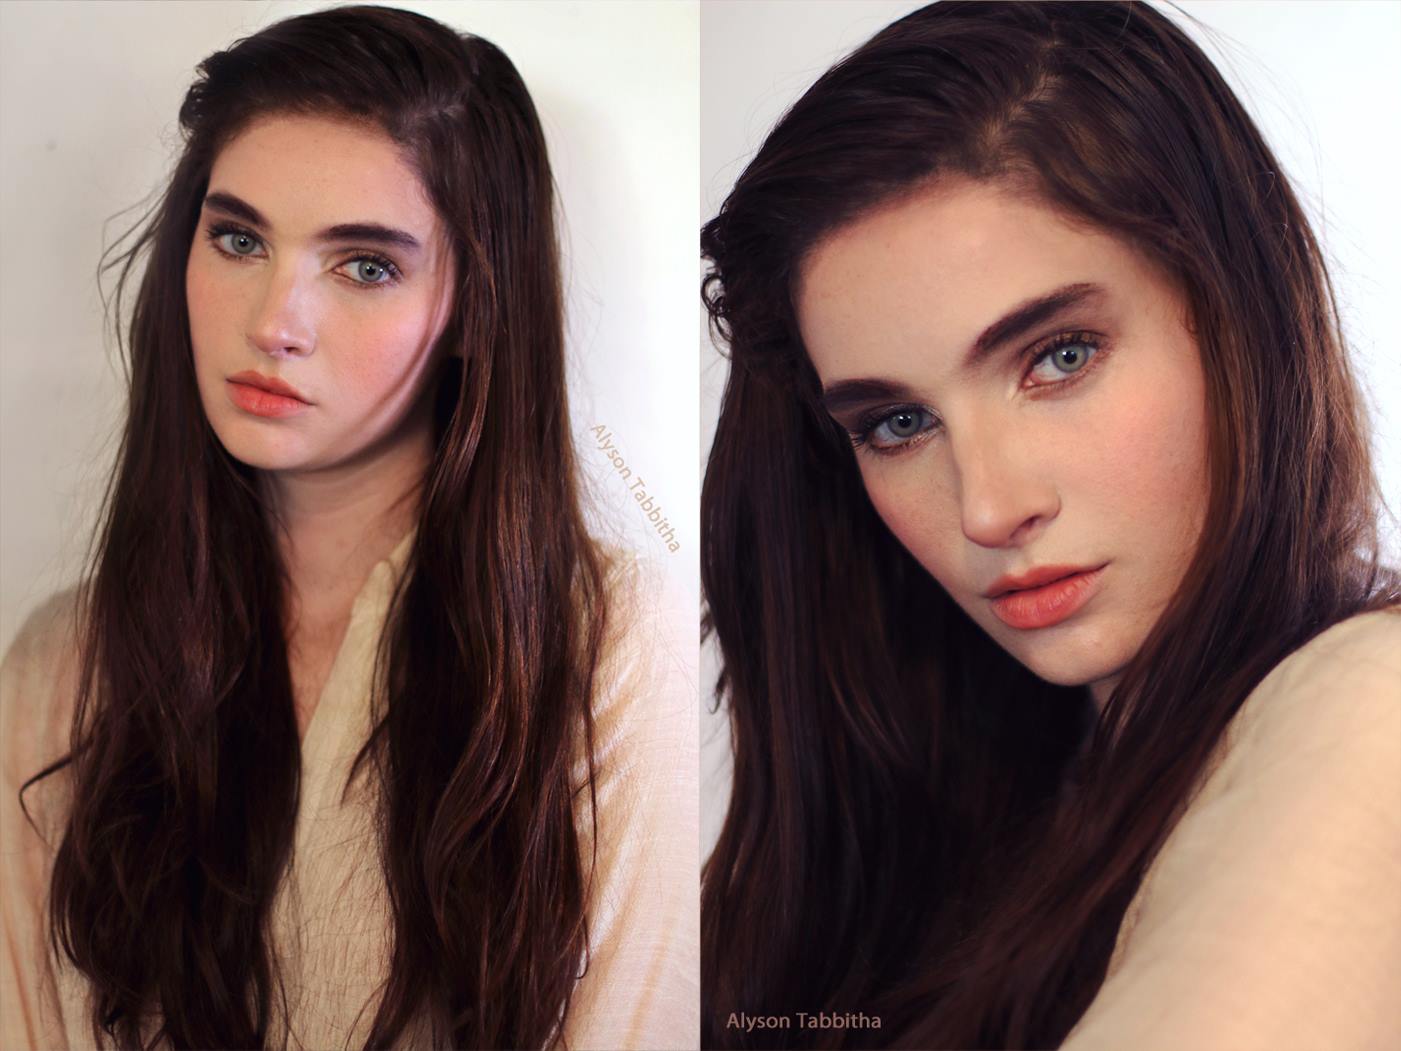 Cosplayer Straight Up Becomes Labyrinth’s Jennifer Connelly